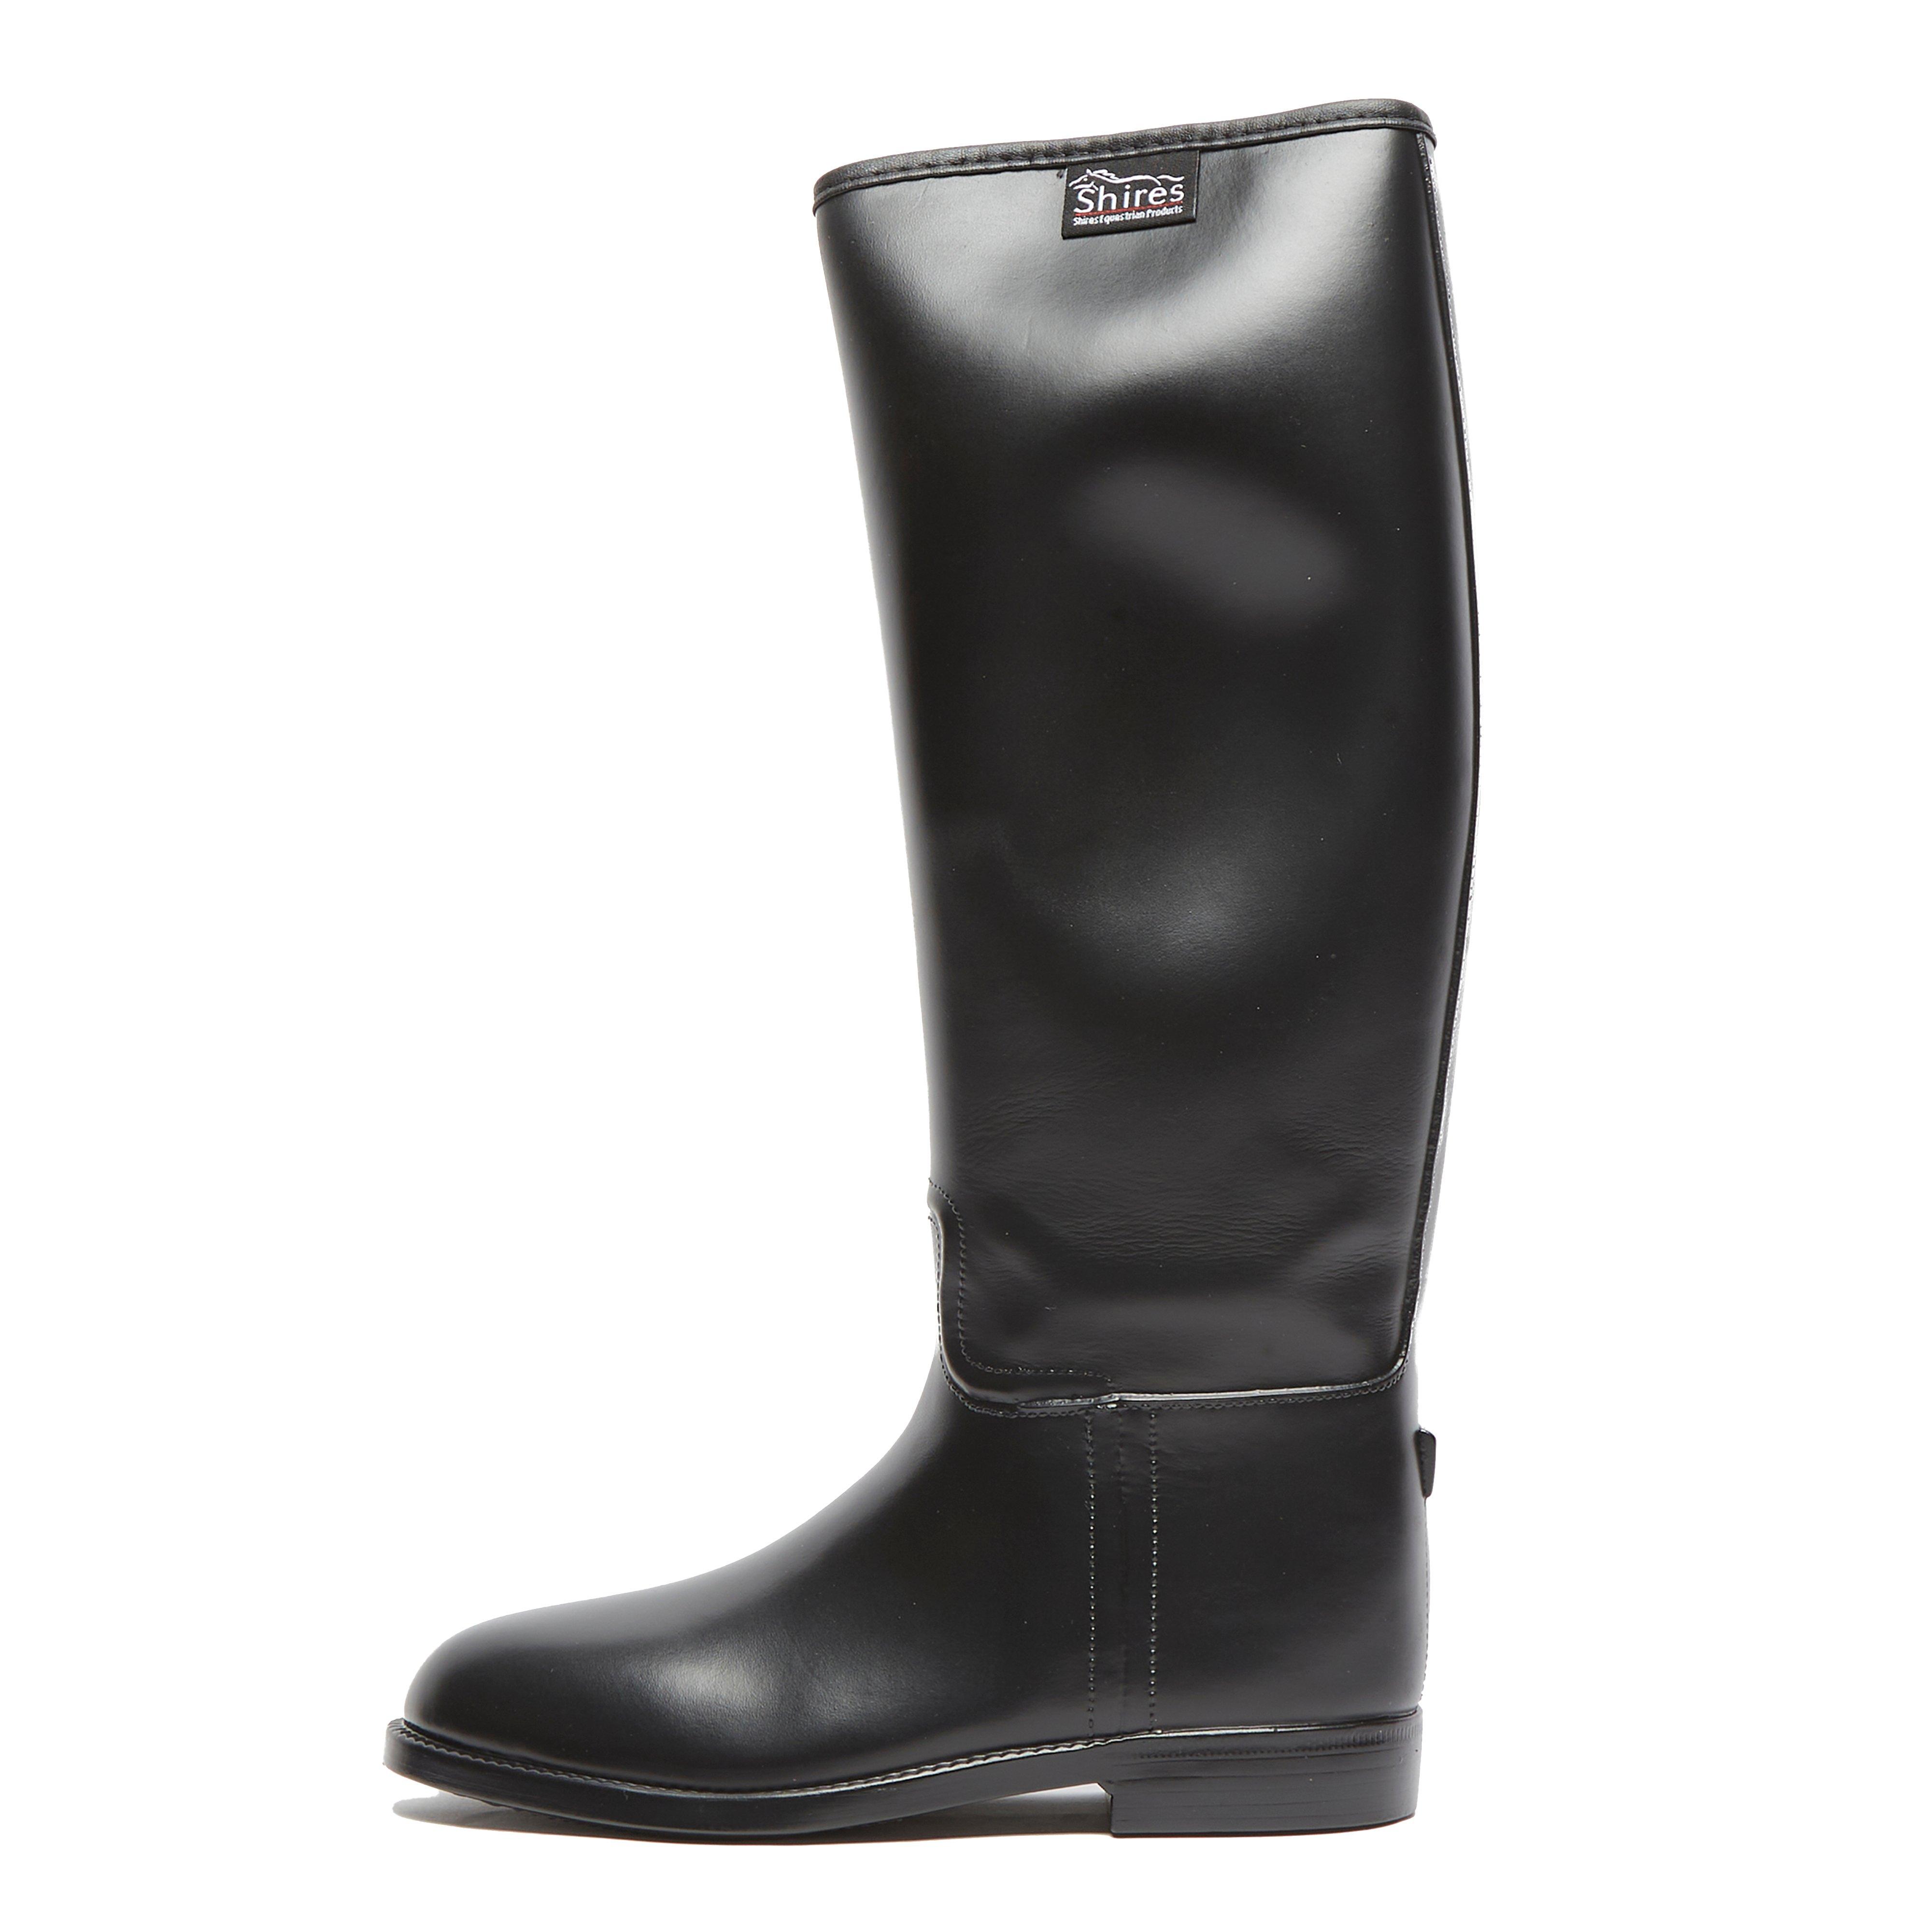 Shires Children's Long Rubber Riding Boot Review